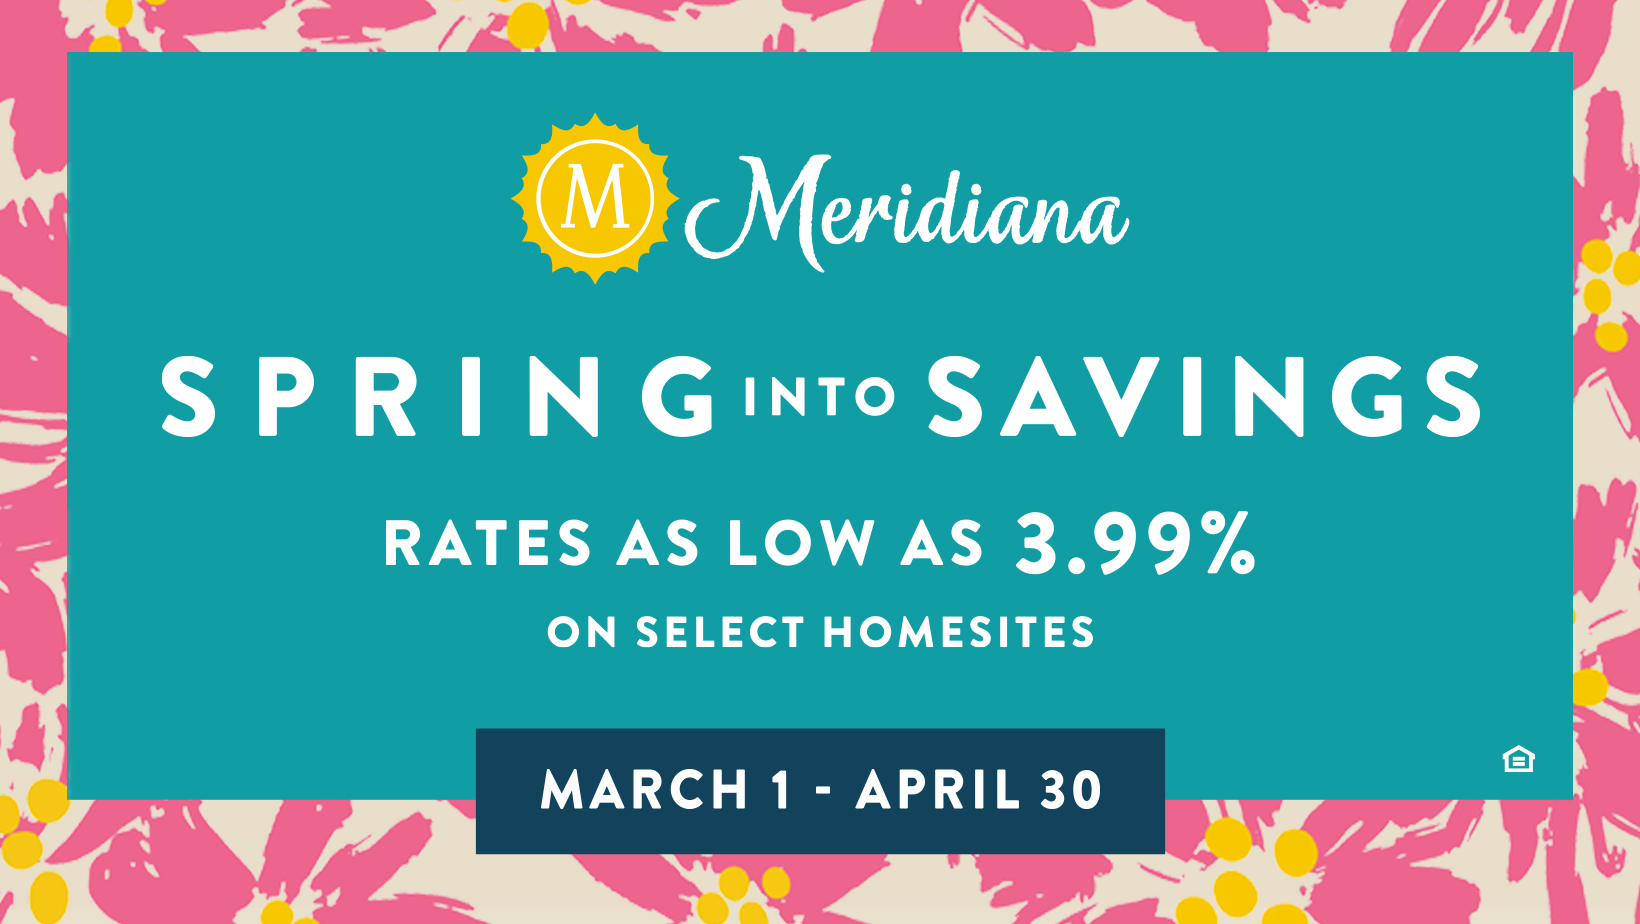 Unlock Incredible Savings:  Low Interest Rate Highlights Meridiana’s Spring into Savings Sales Event